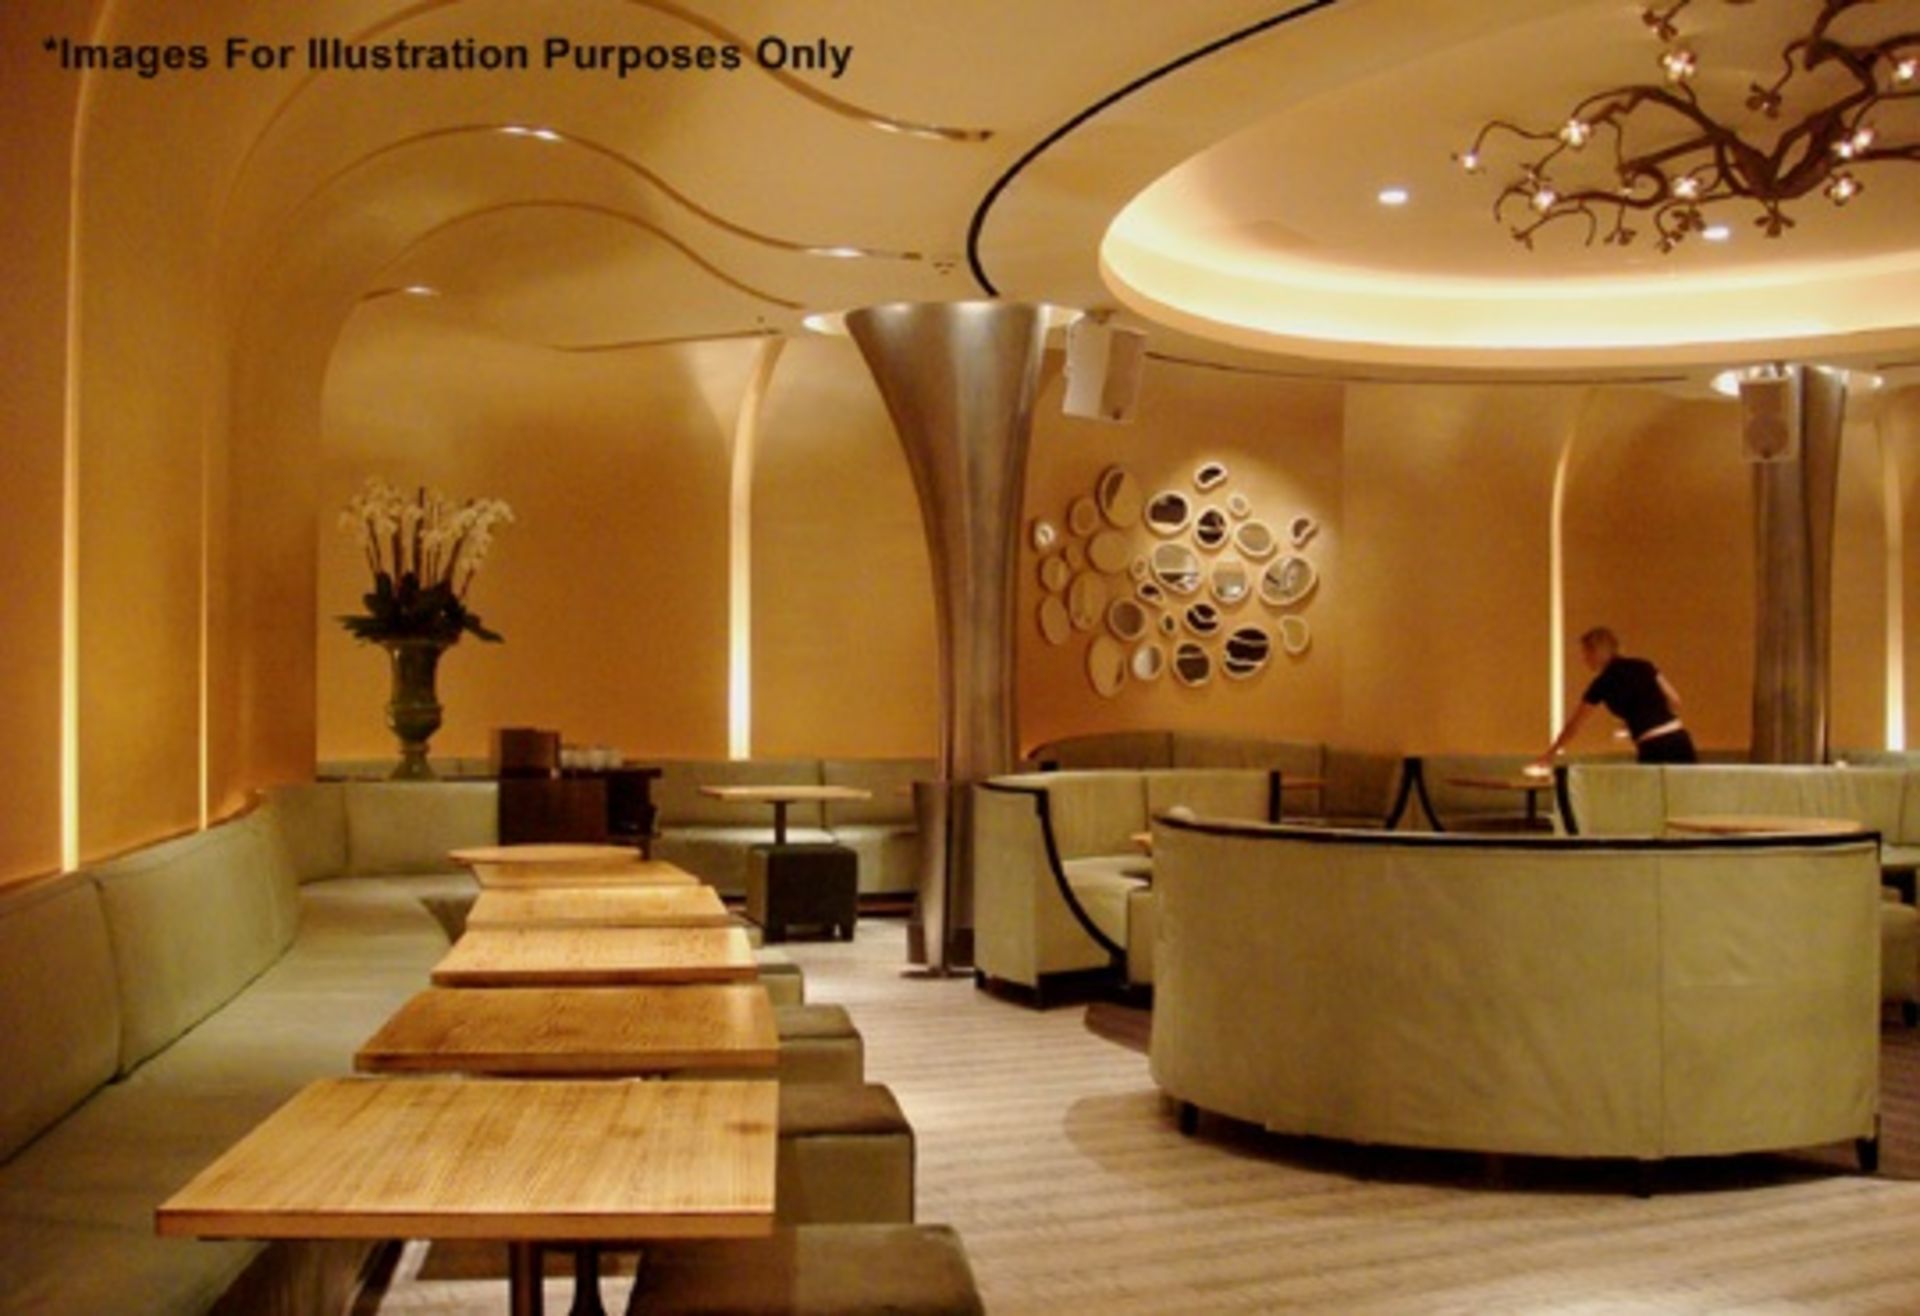 1 x Luxury Upholstered Long Curved Seating Area - Recently Removed From Nobu - Dimensions: W420 x - Image 10 of 14